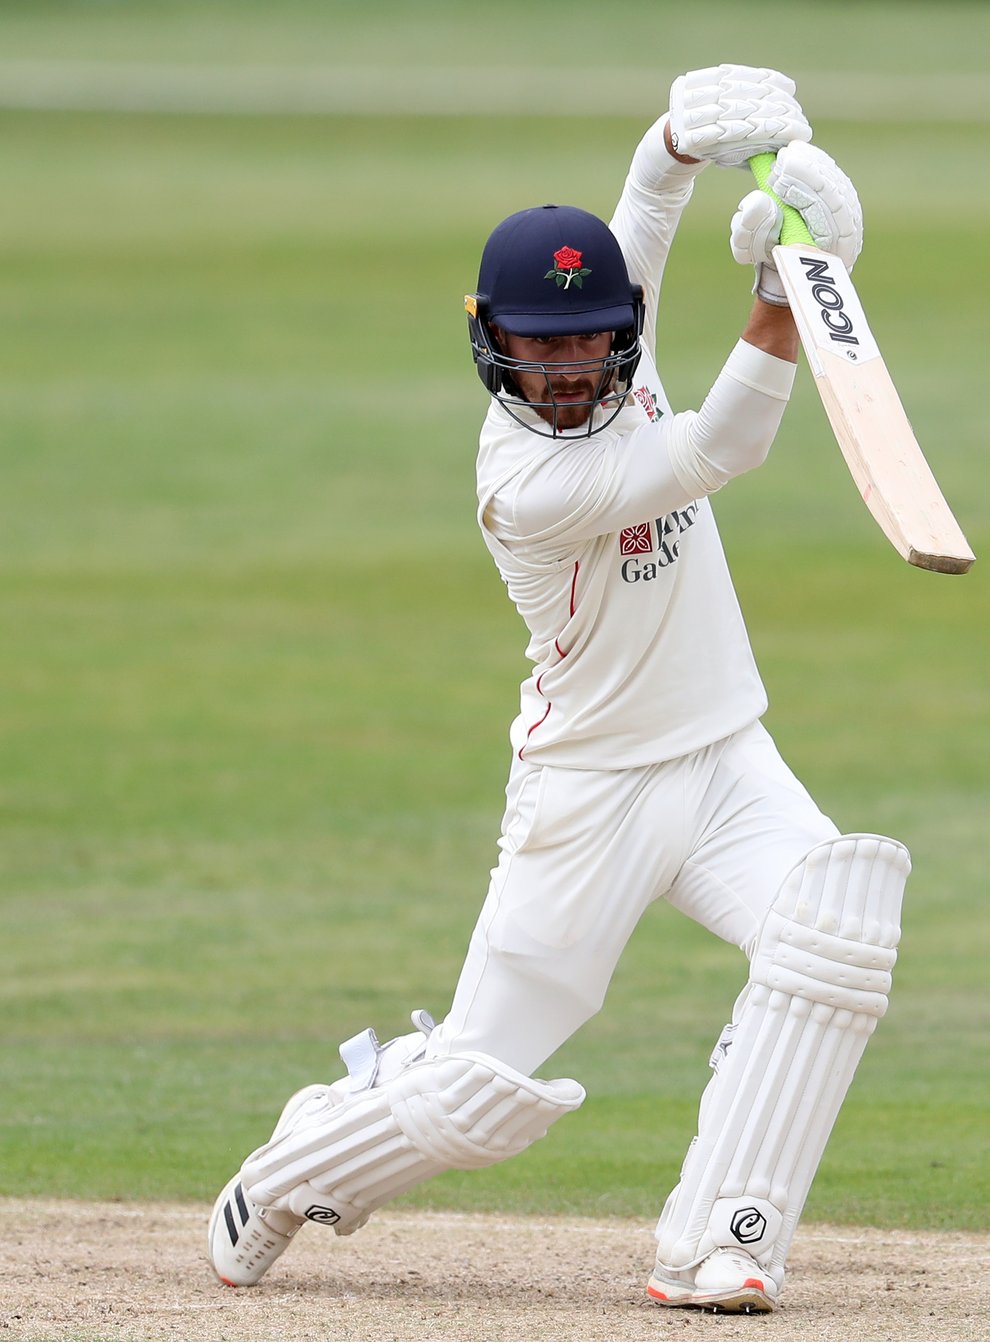 Josh Bohannon's unbeaten 127 gave Lancashire a first-innings lead of 350 in the Roses Championship clash